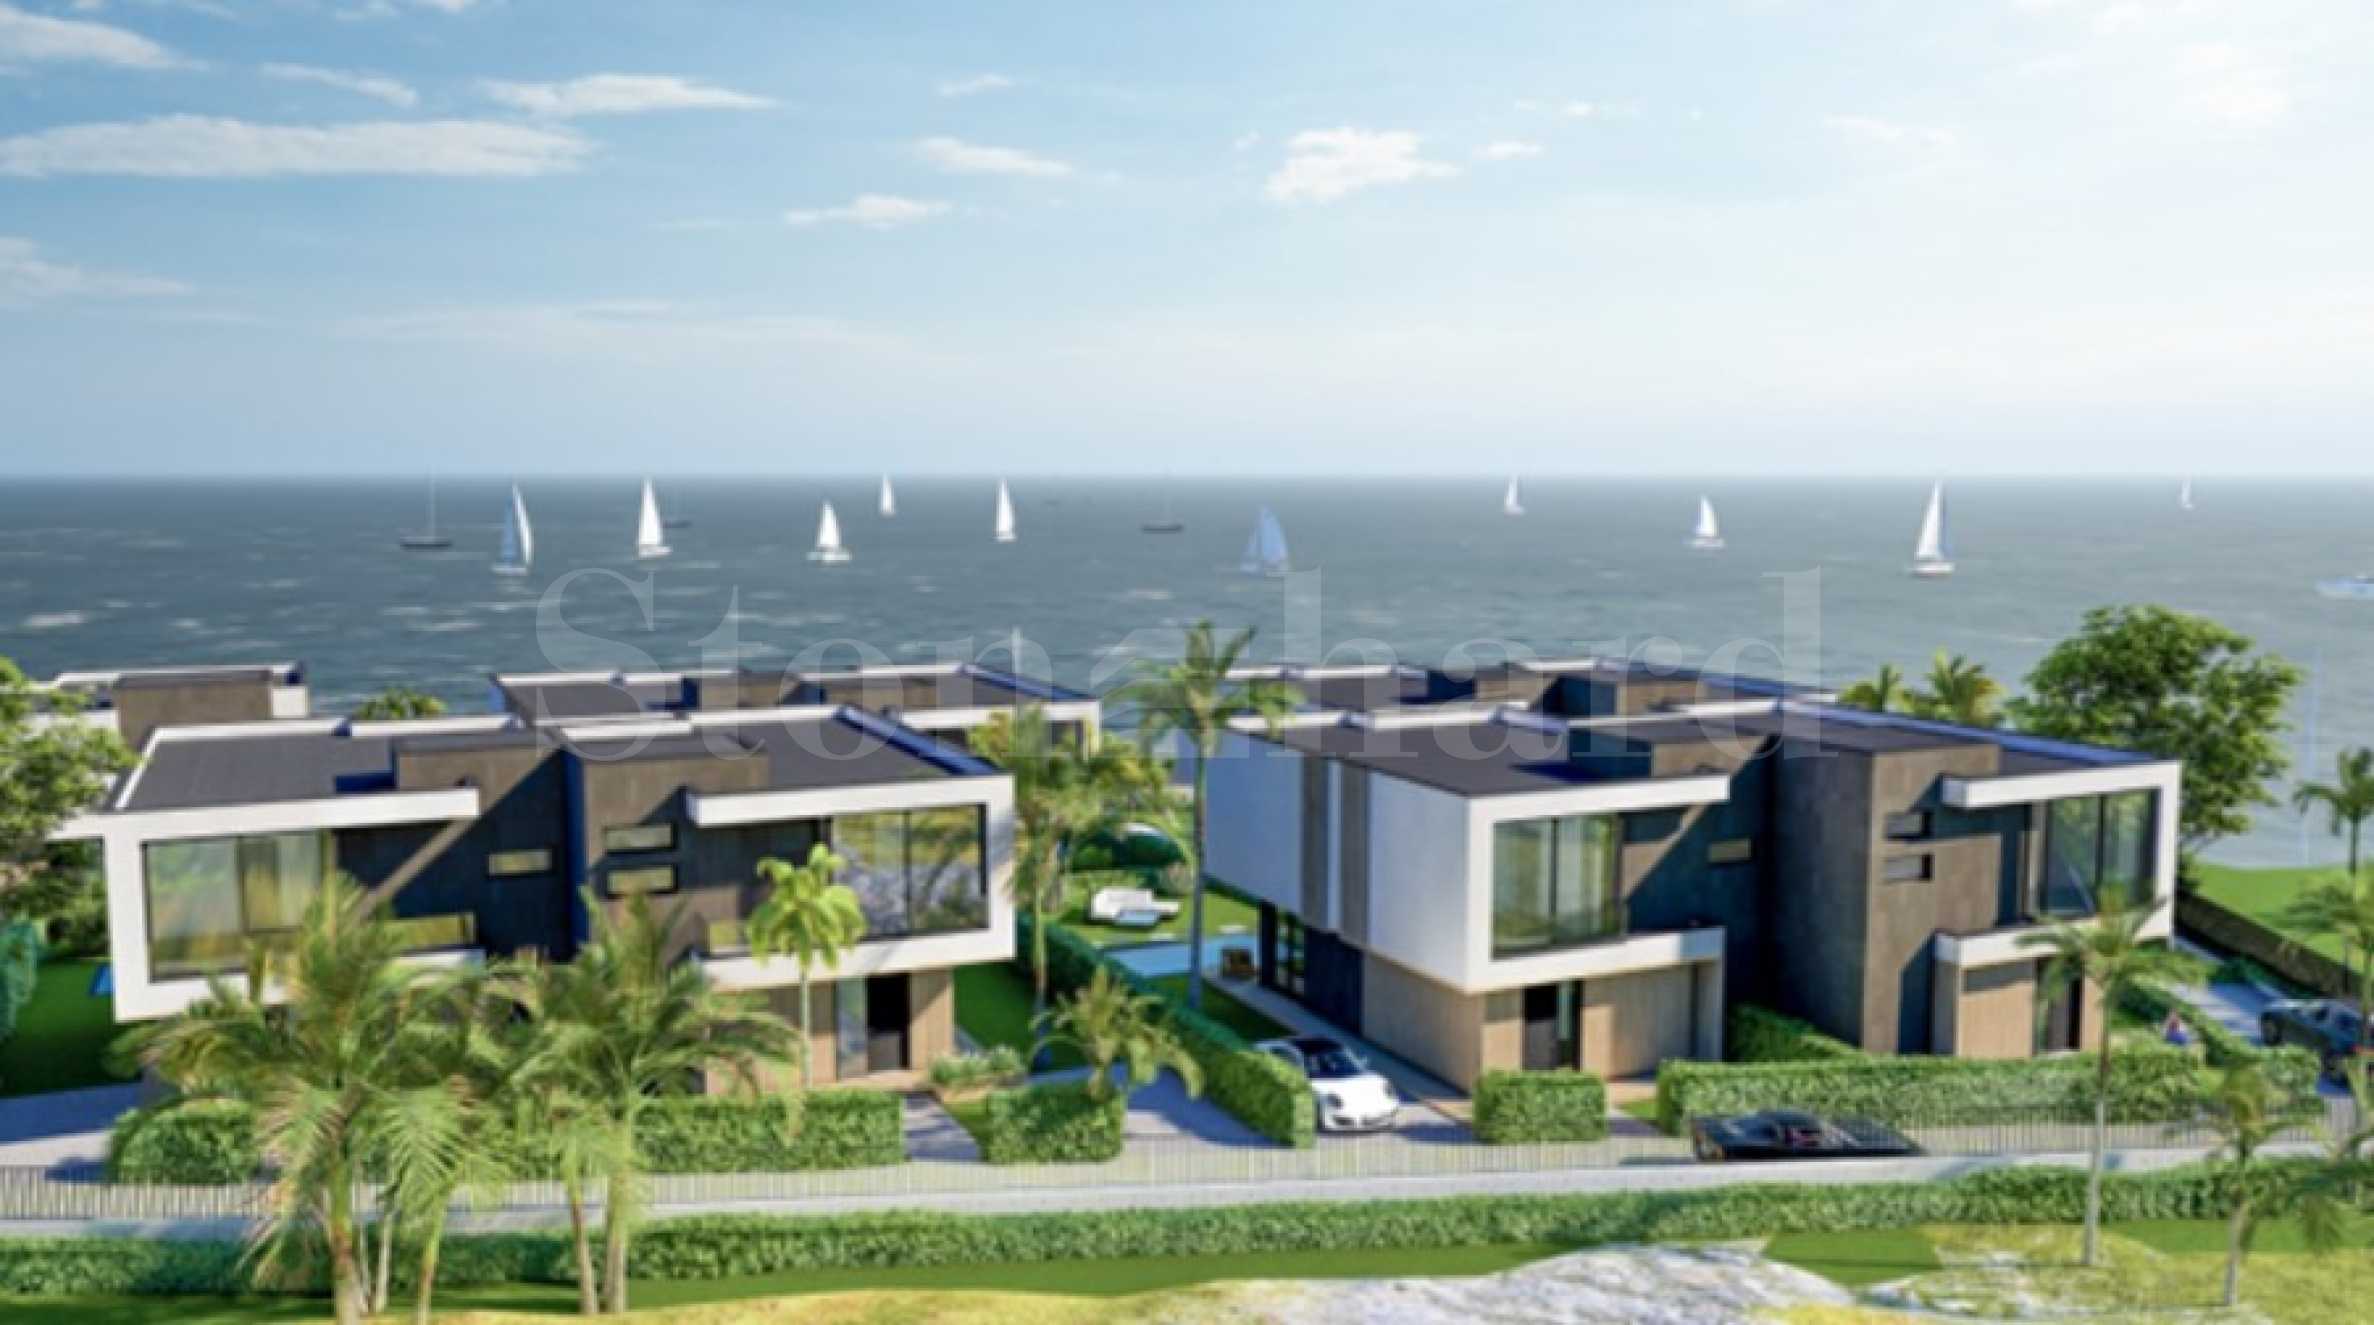 Single-family two-story houses in a new gated complex in Nessebar1 - Stonehard